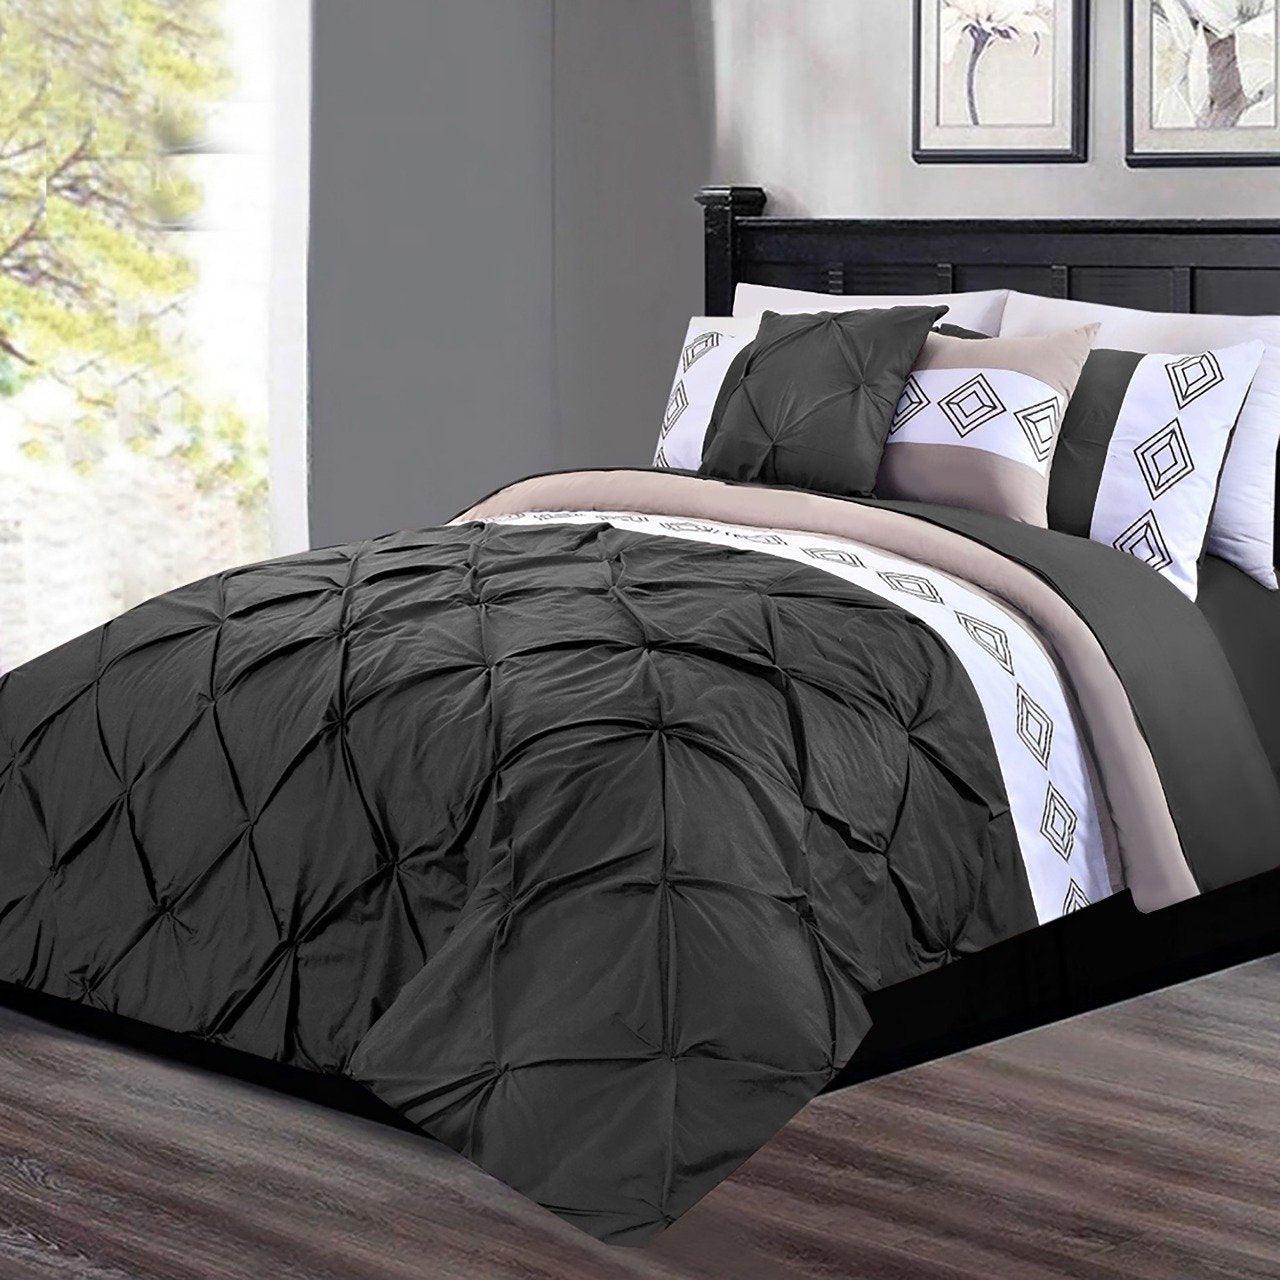 8 Pc's Luxury Embroidered Bedspread Grey With Light Filling - 92Bedding